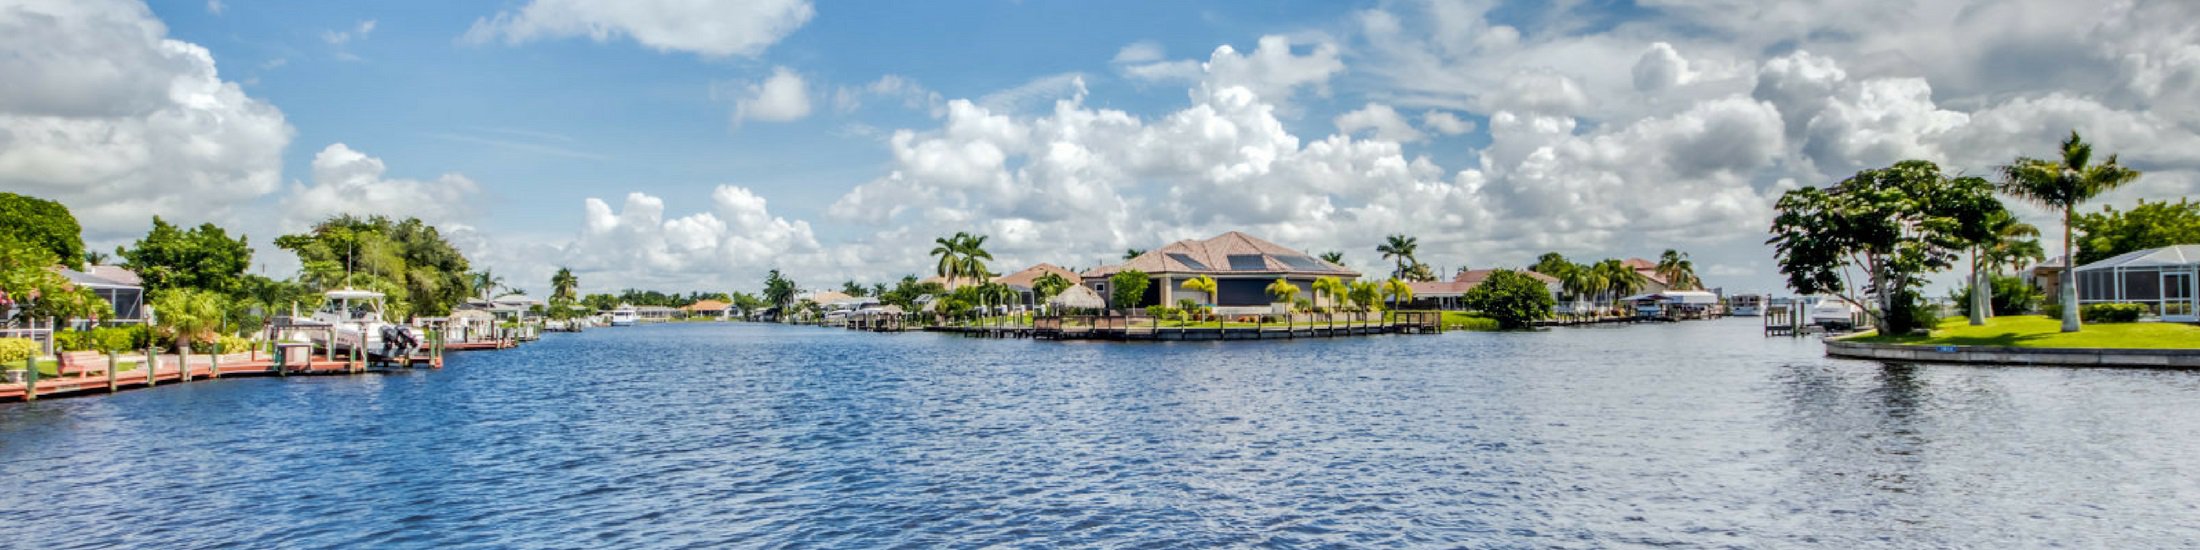 Palmetto Pines Country Club Homes for Sale